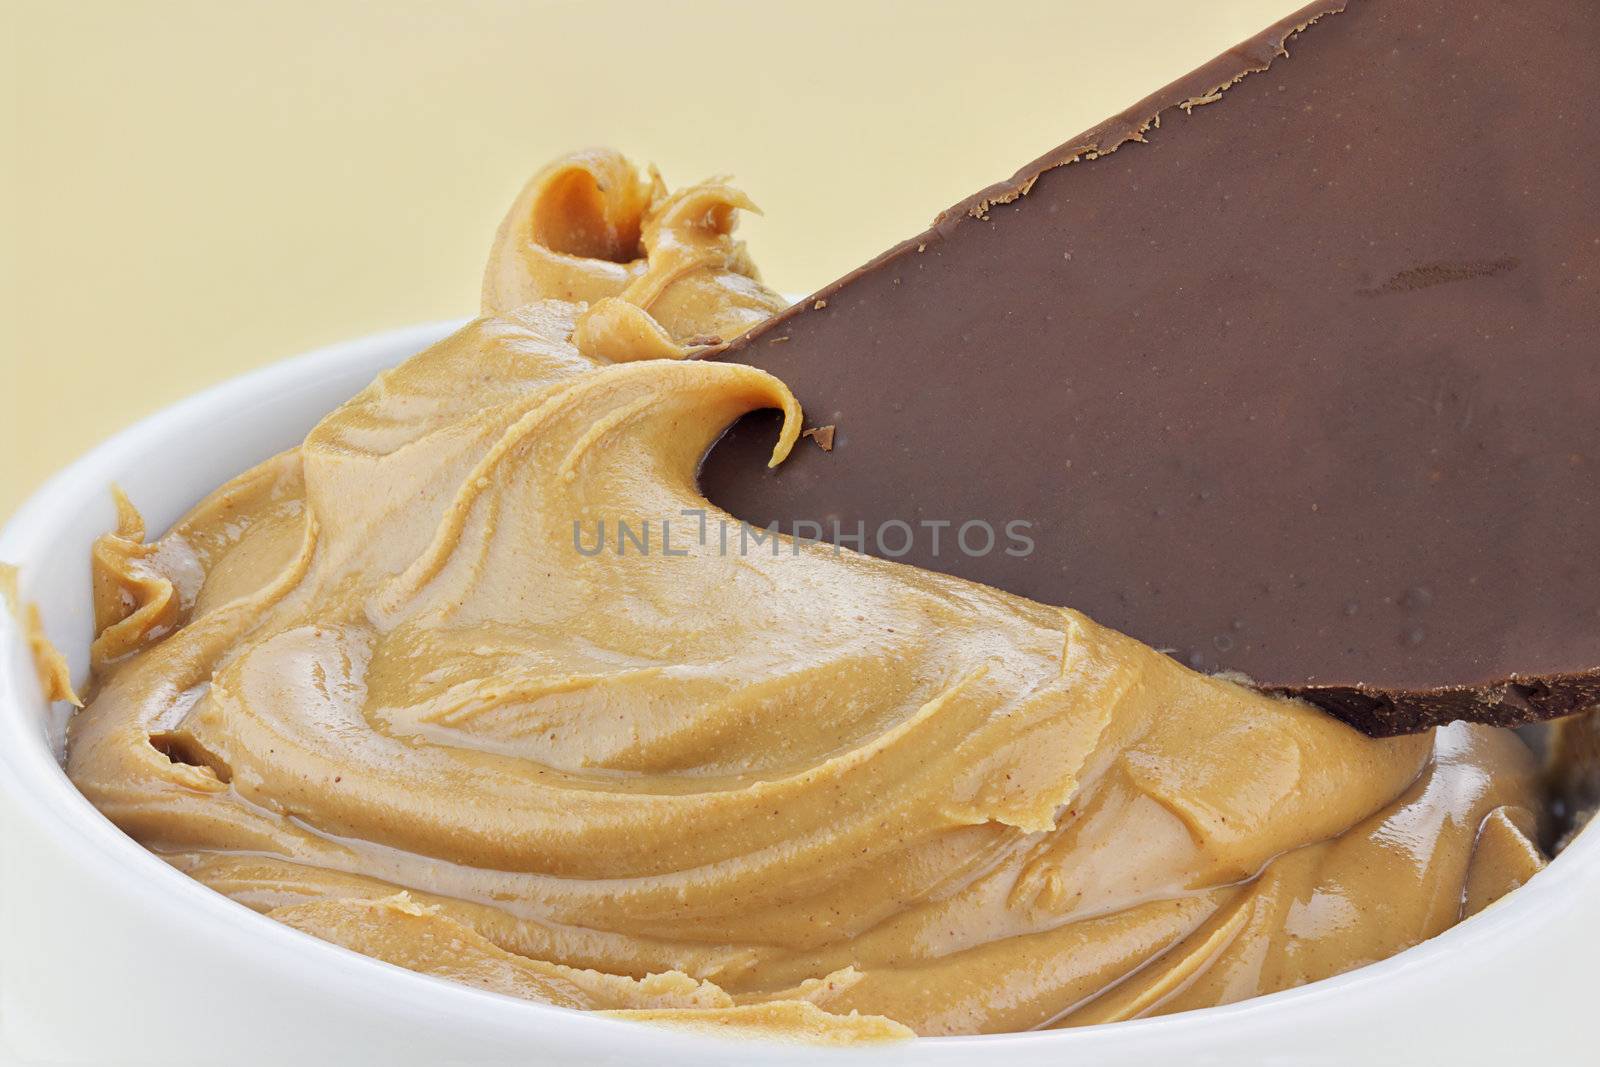 Peanut butter with a piece of a chocolate candy bar dipped into it.
